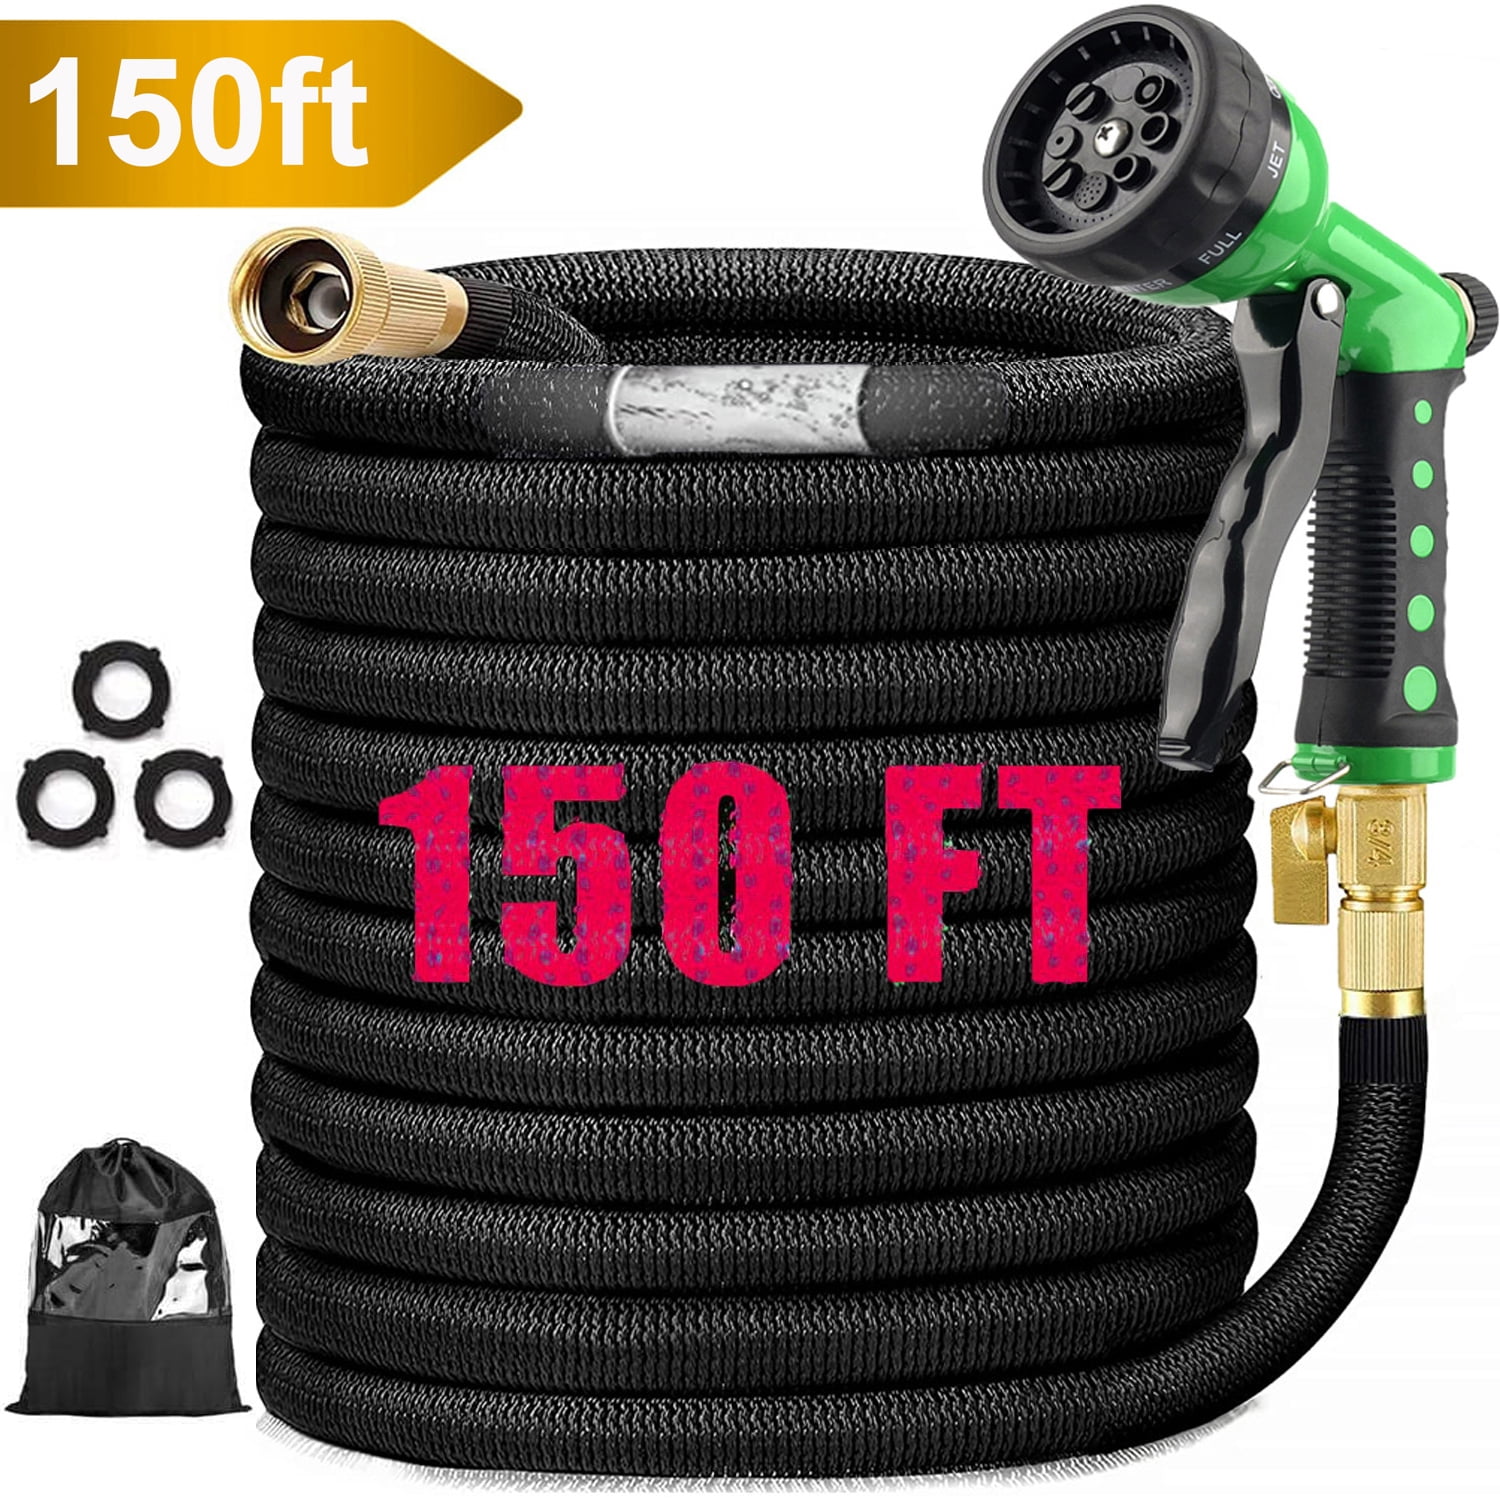 100ft Upgraded Expandable Garden Hose Set, Extra Strength Fabric Triple  Layer Latex Core, 3/4 Solid Brass Fittings, 8 Function Spray Nozzle with  Storage Bag, Premium No-Kink Flexible Water Hose 